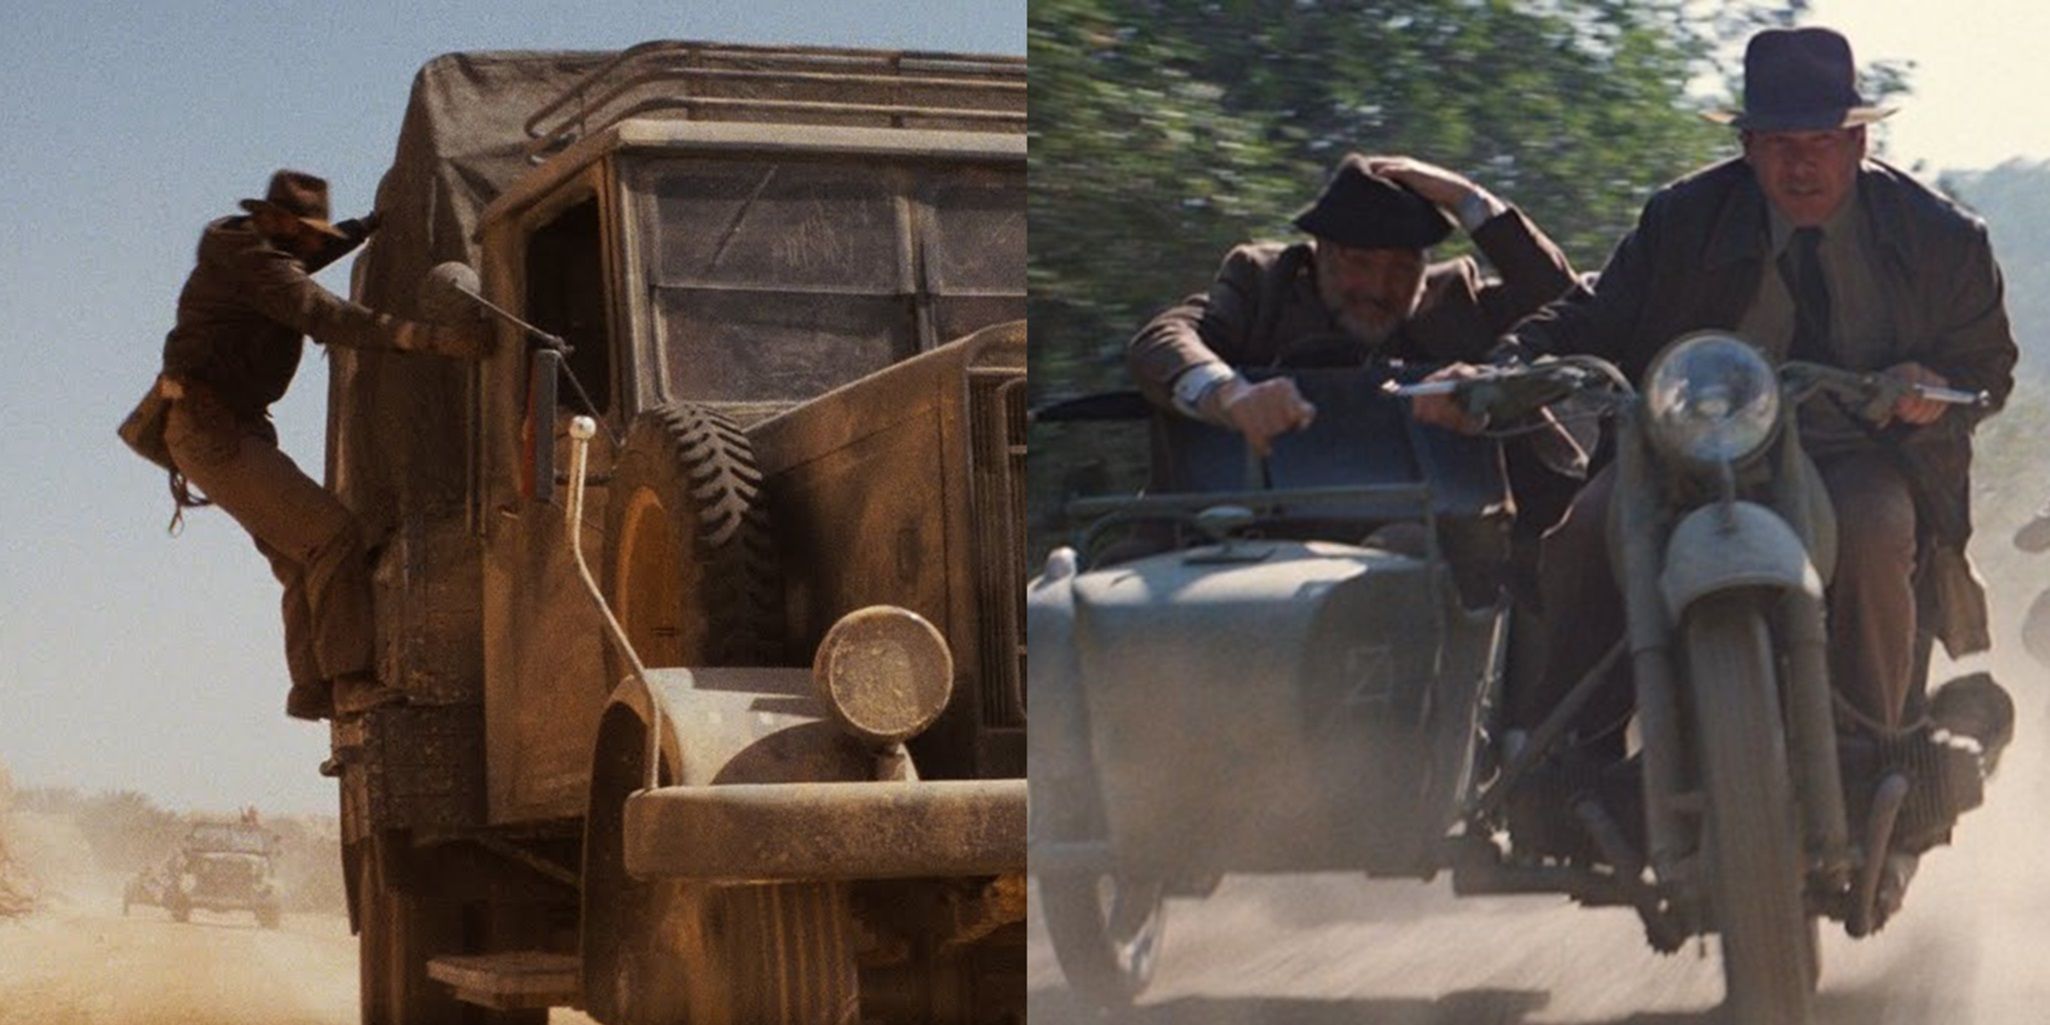 Split_image_of_Indy_hanging_from_a_truck_in_Raiders_of_the_Lost_Ark_and_Indy_riding_a_motorcycle_in_Indiana_Jones_and_the_Last_Crusade